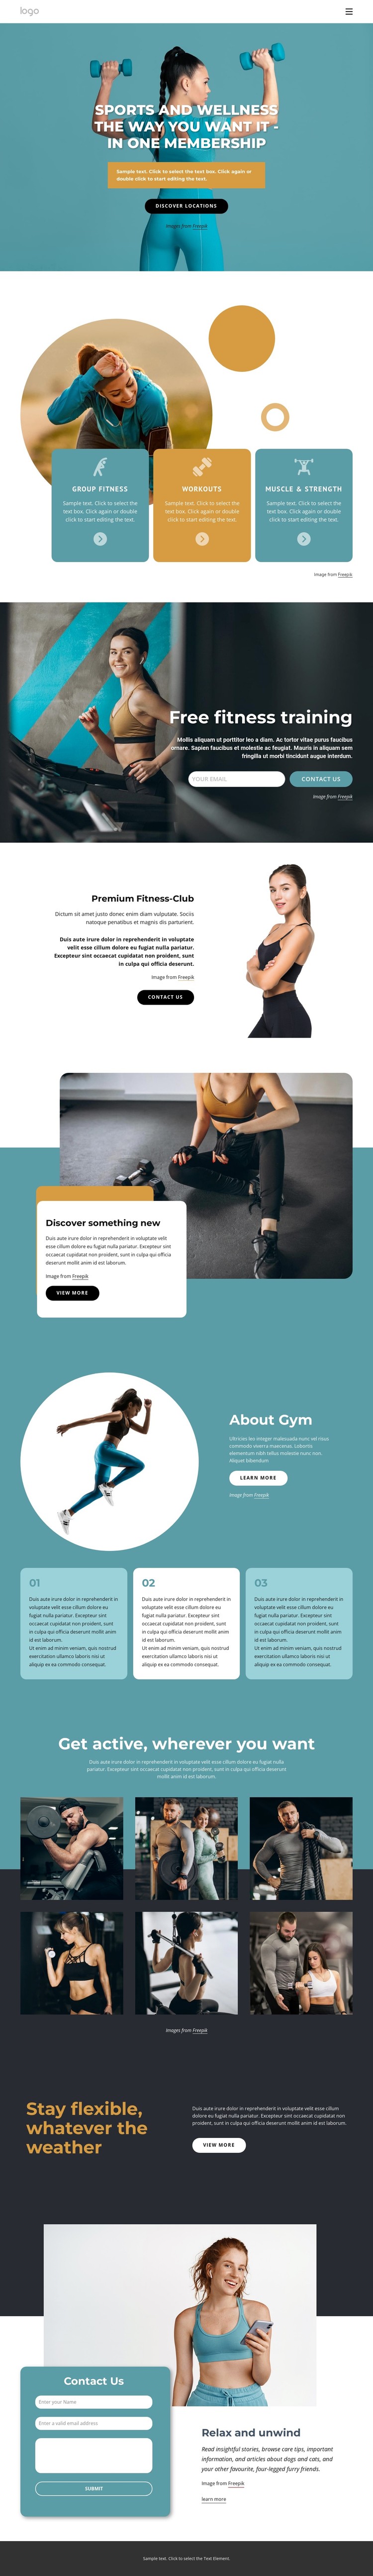 Workout anywhere with one membership Static Site Generator